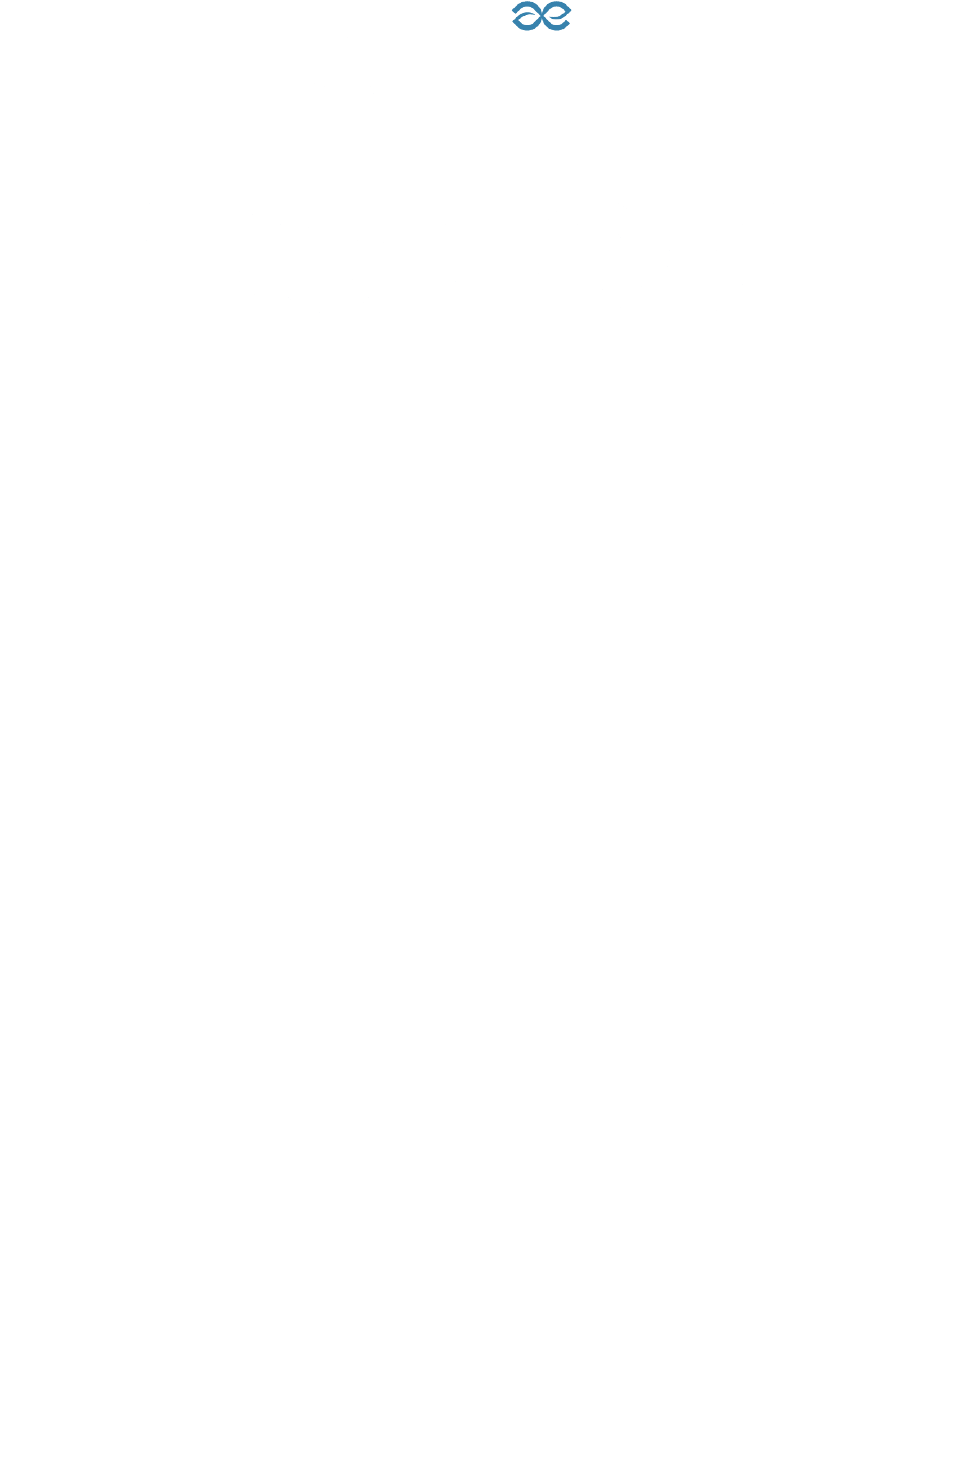 PROBIOME ingredients